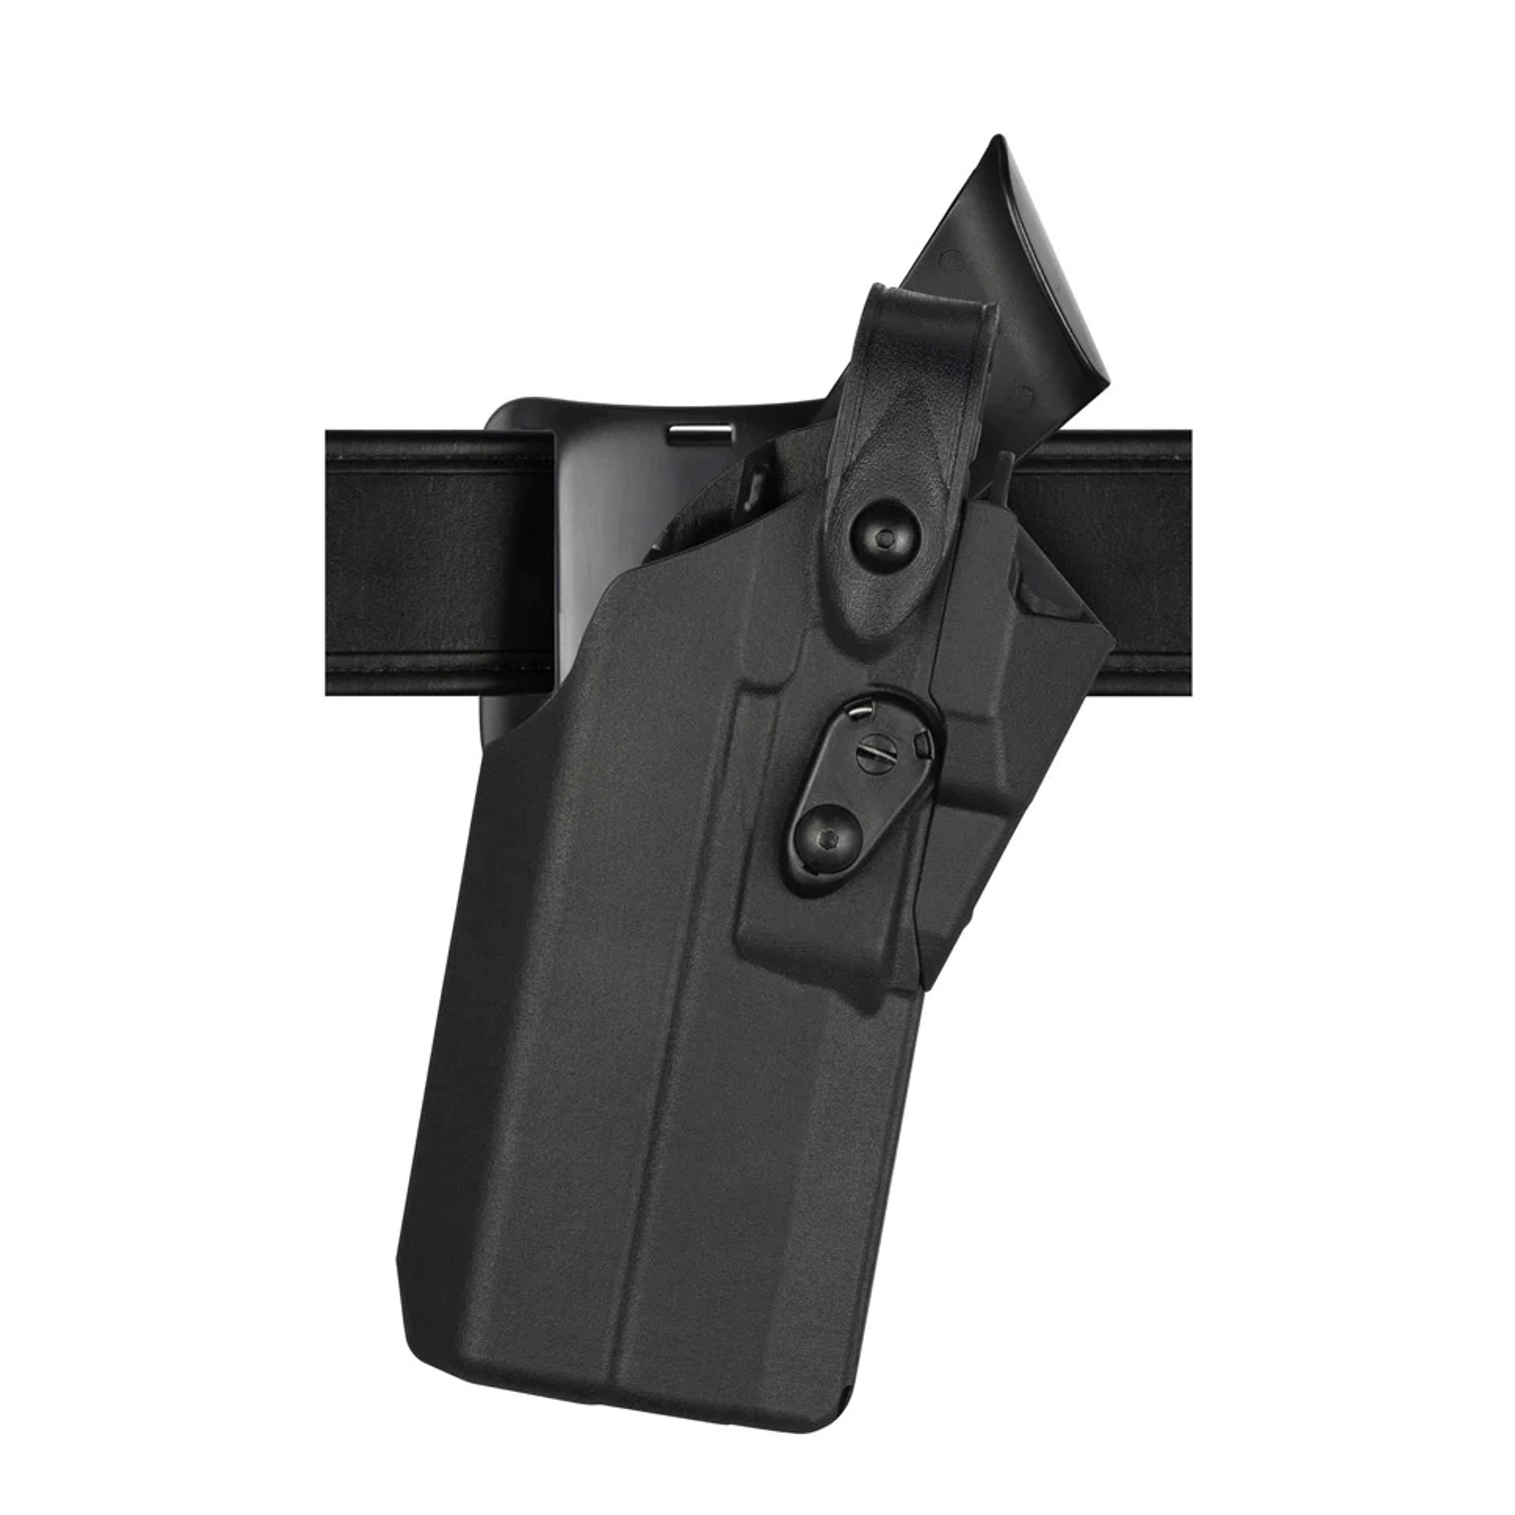 Model 7360rds 7ts Als/sls Mid-ride Duty Holster For Sig Sauer P320 X5 W/ Light